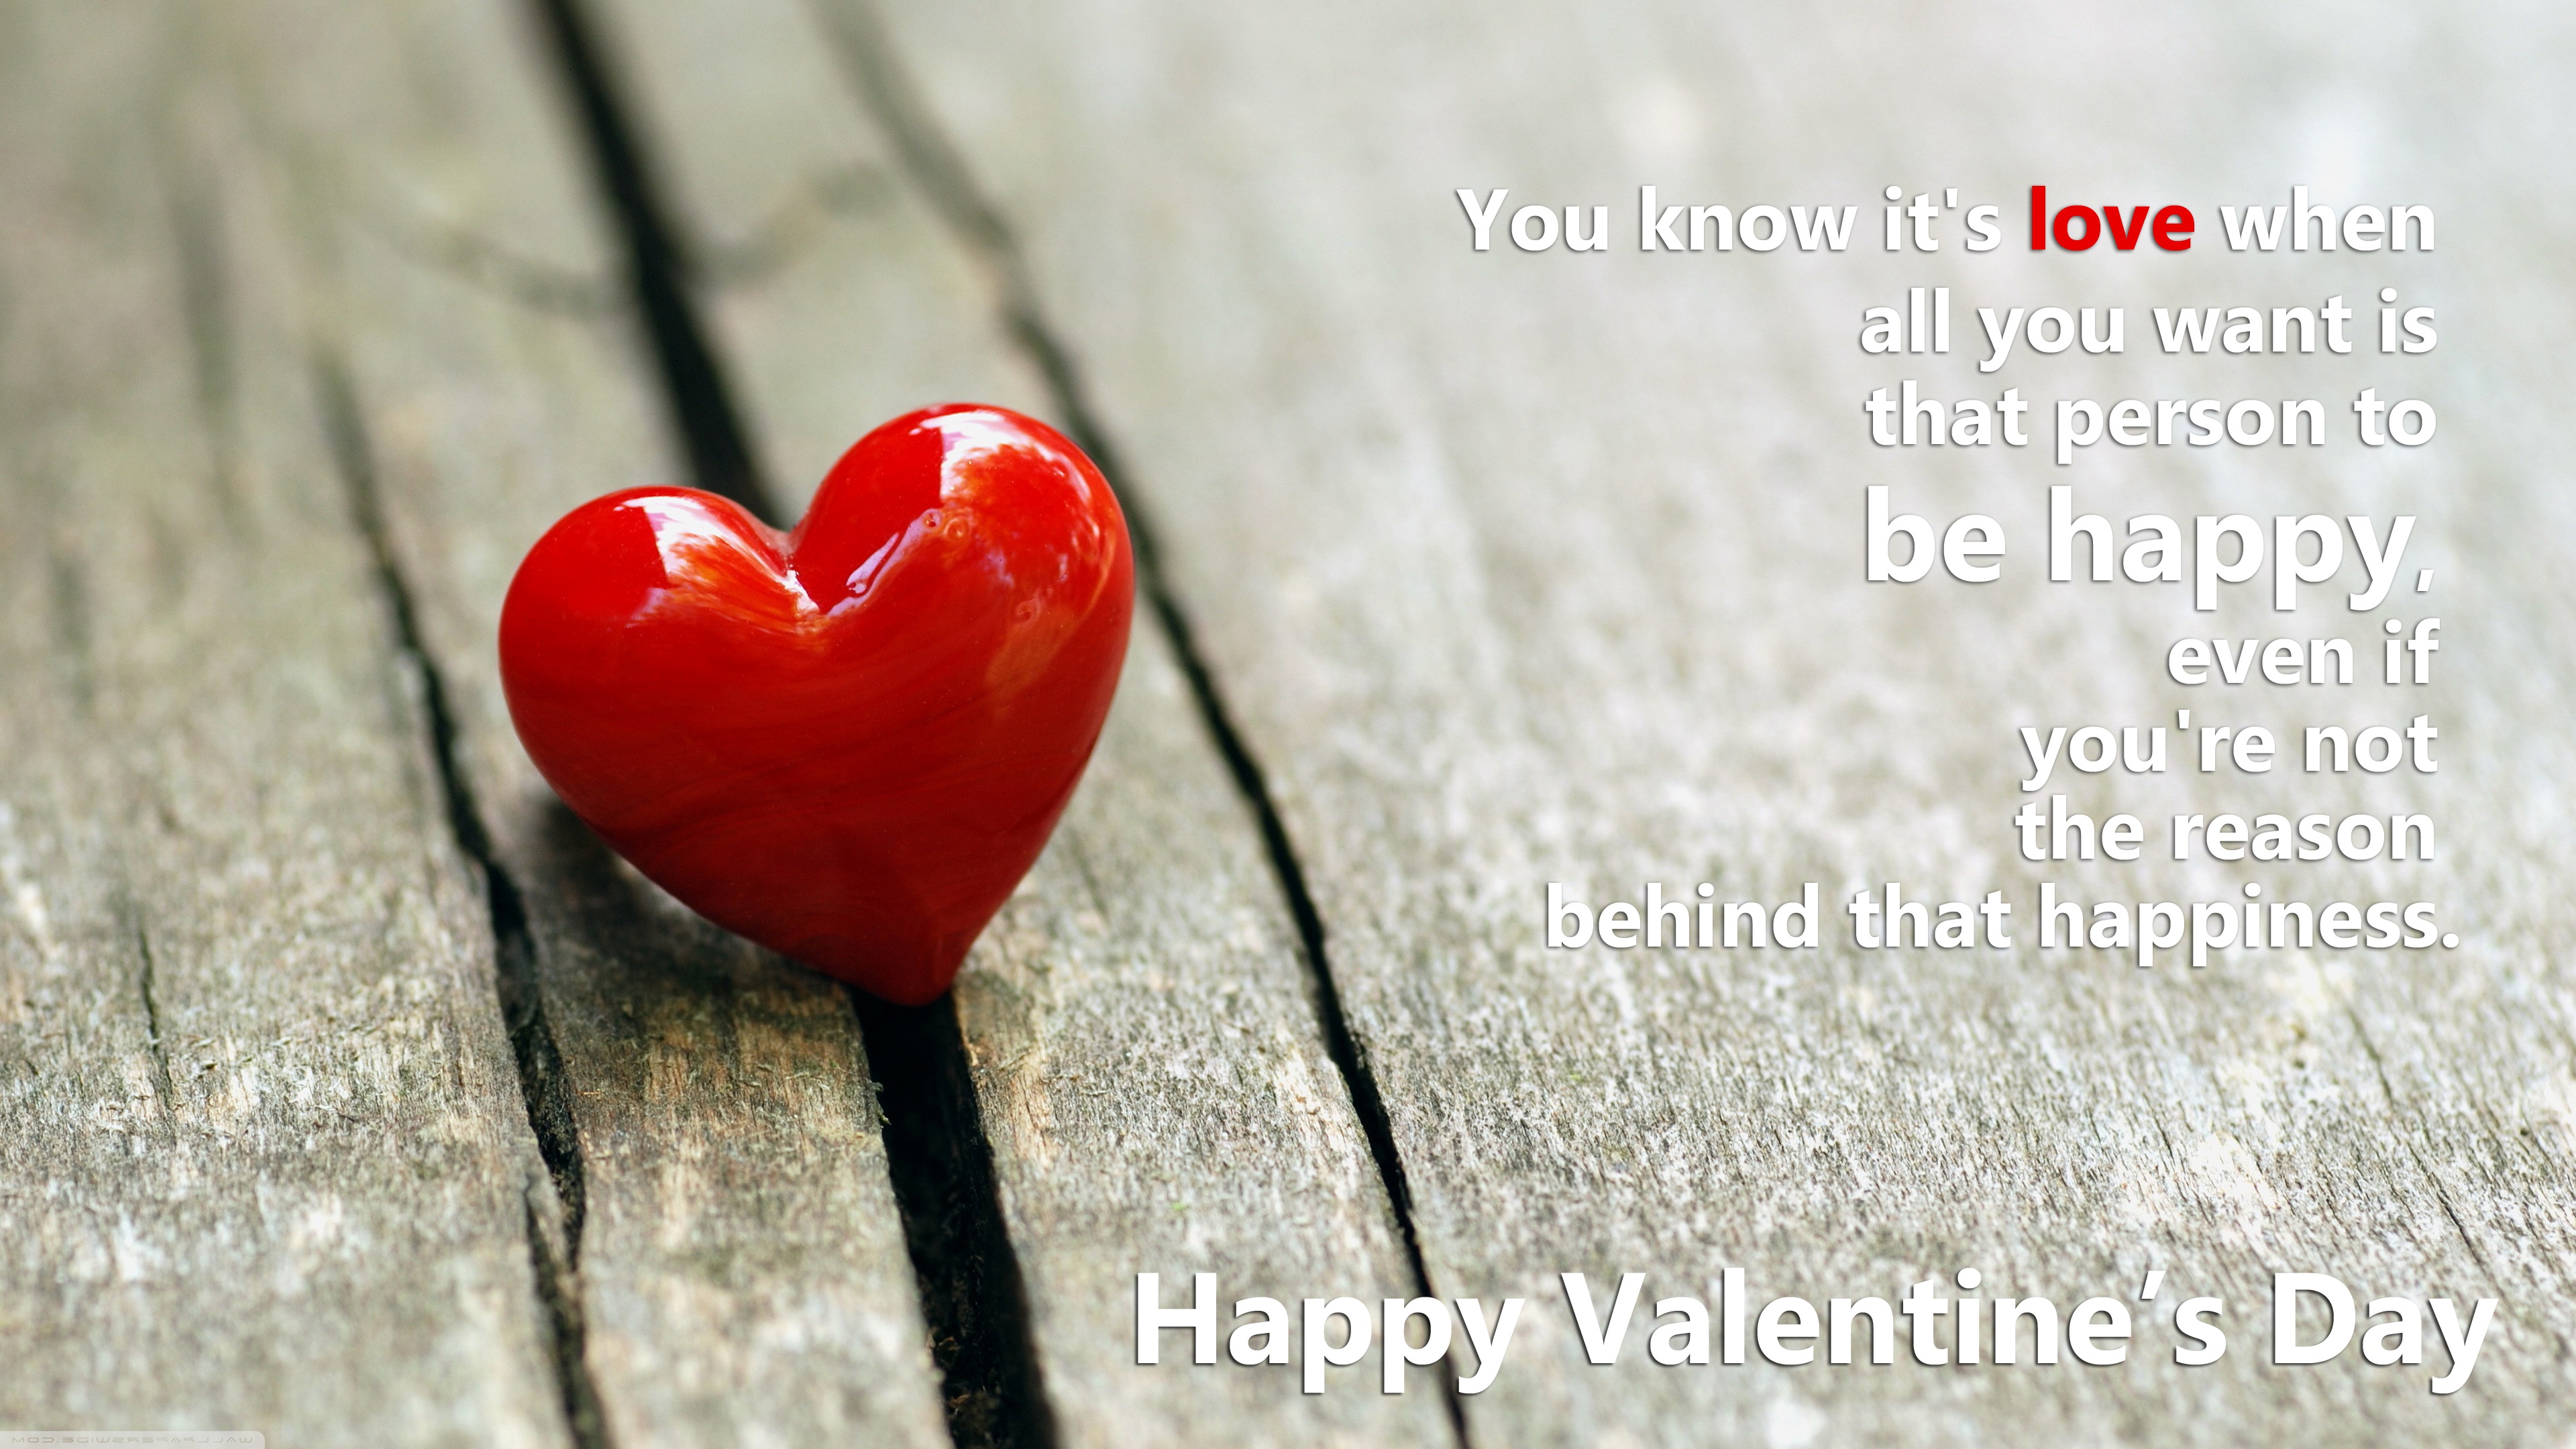 Valentine Love Wallpaper Quotes Amazing Hd - Happy Valentines Day Wishes Friends - HD Wallpaper 